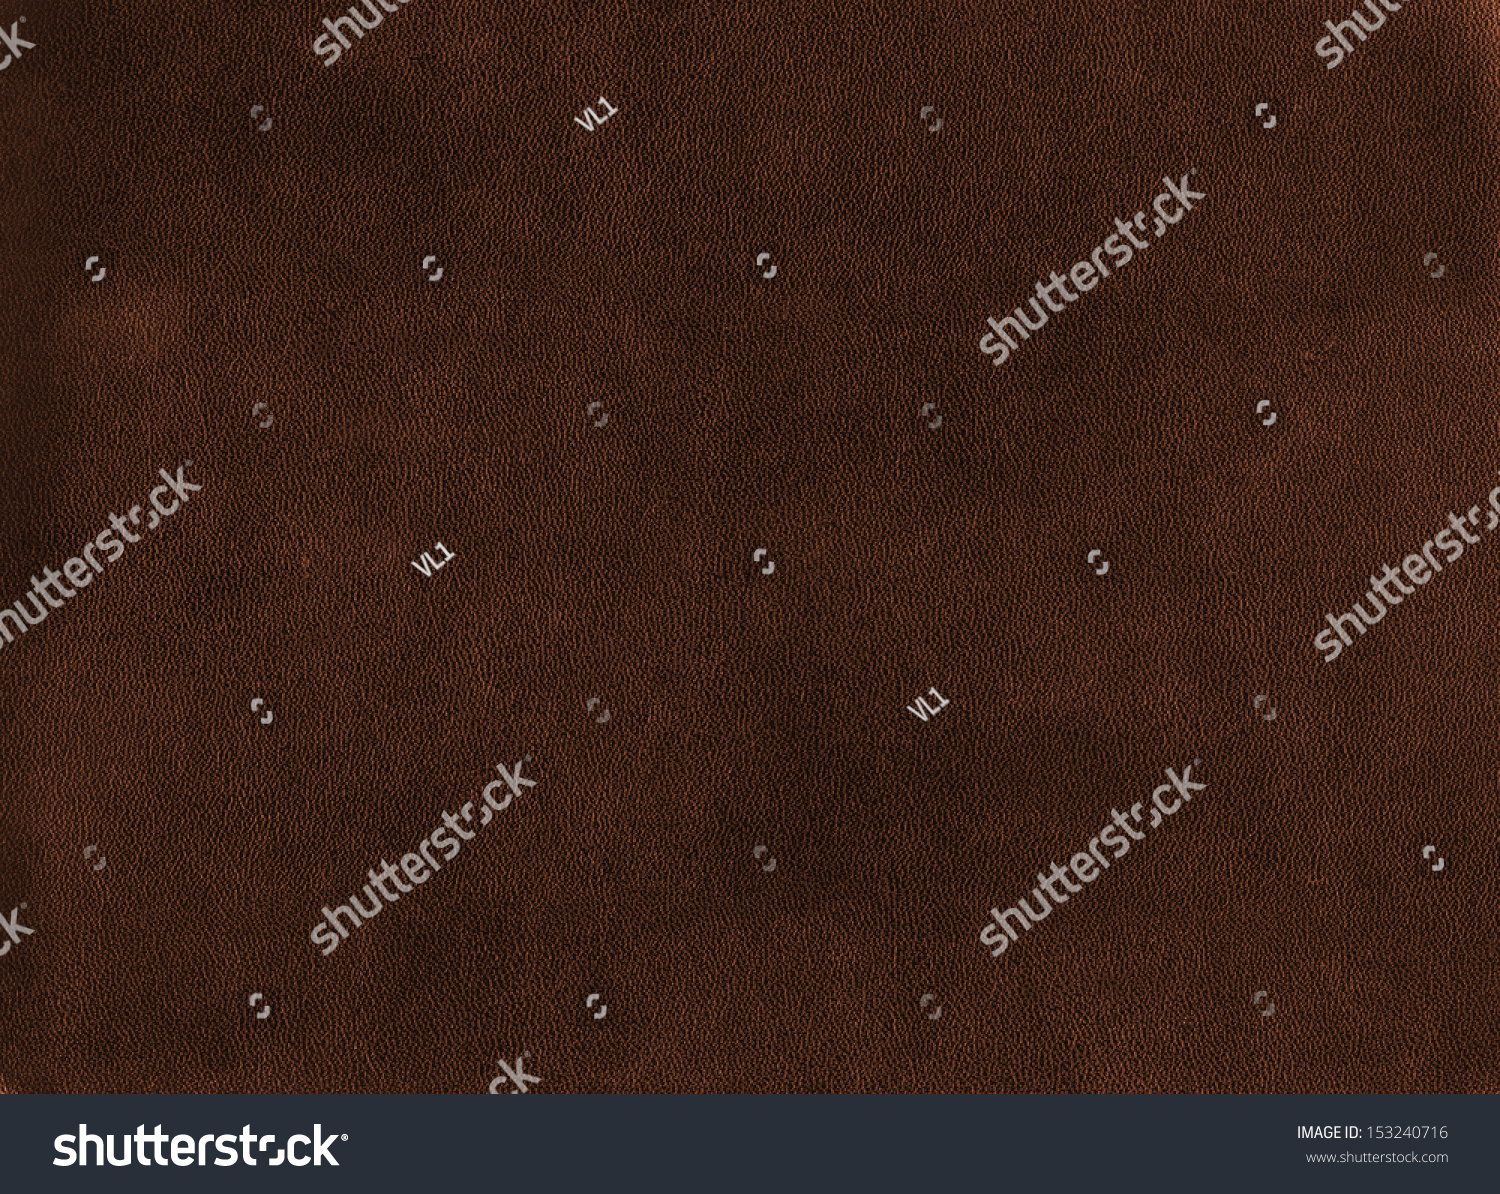 dark brown leather texture closeup  can be used as background.  #153240716